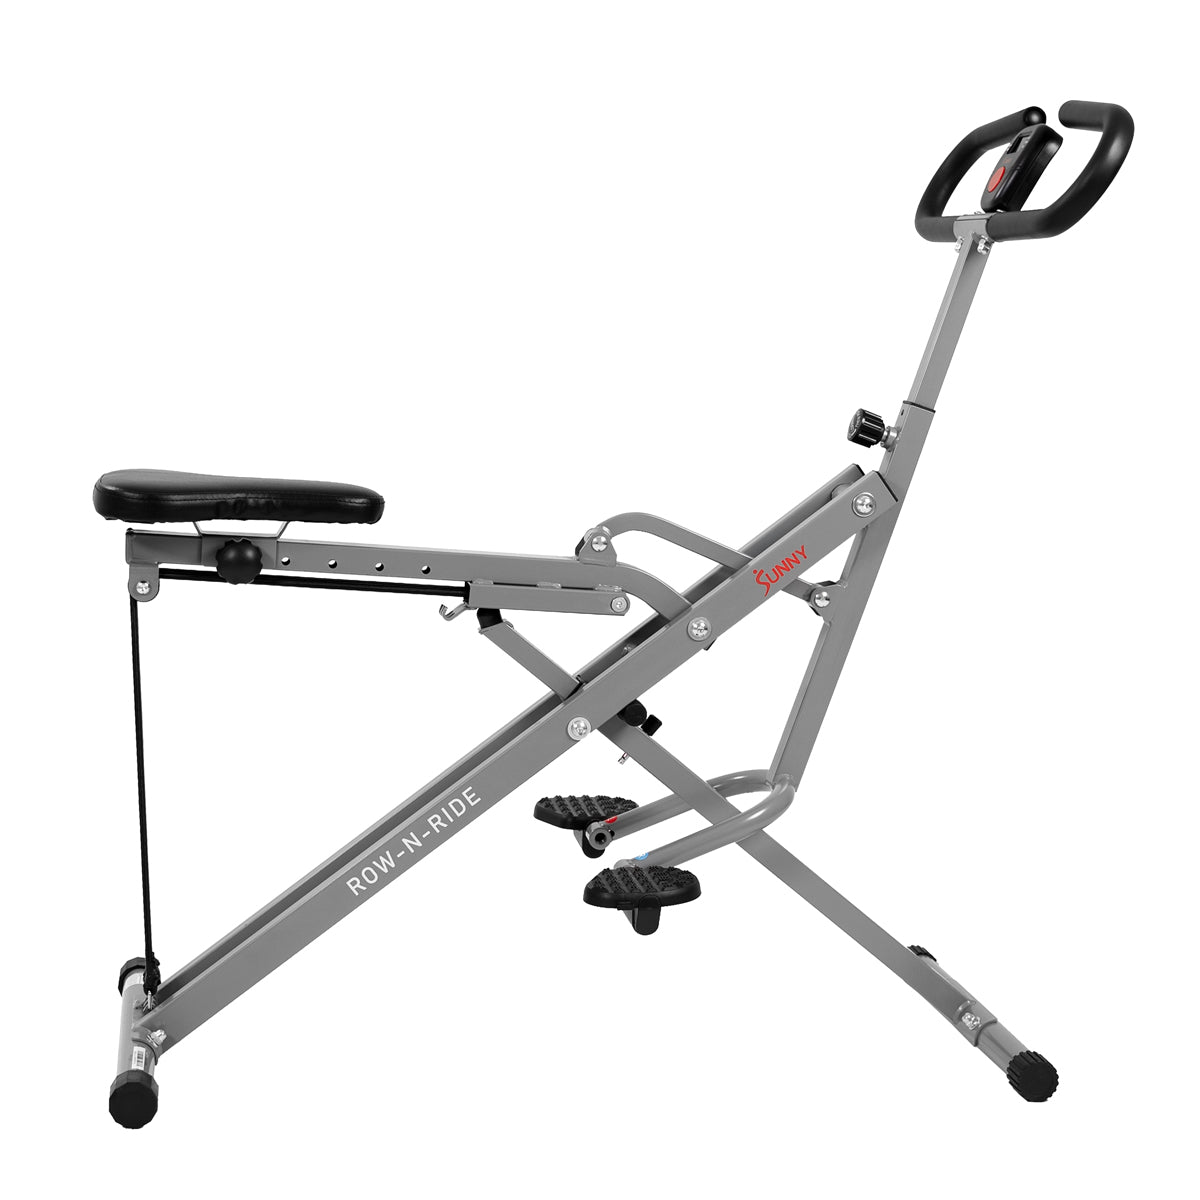 Upright Row-N-Ride® Rowing Machine is the Glute Machine Method